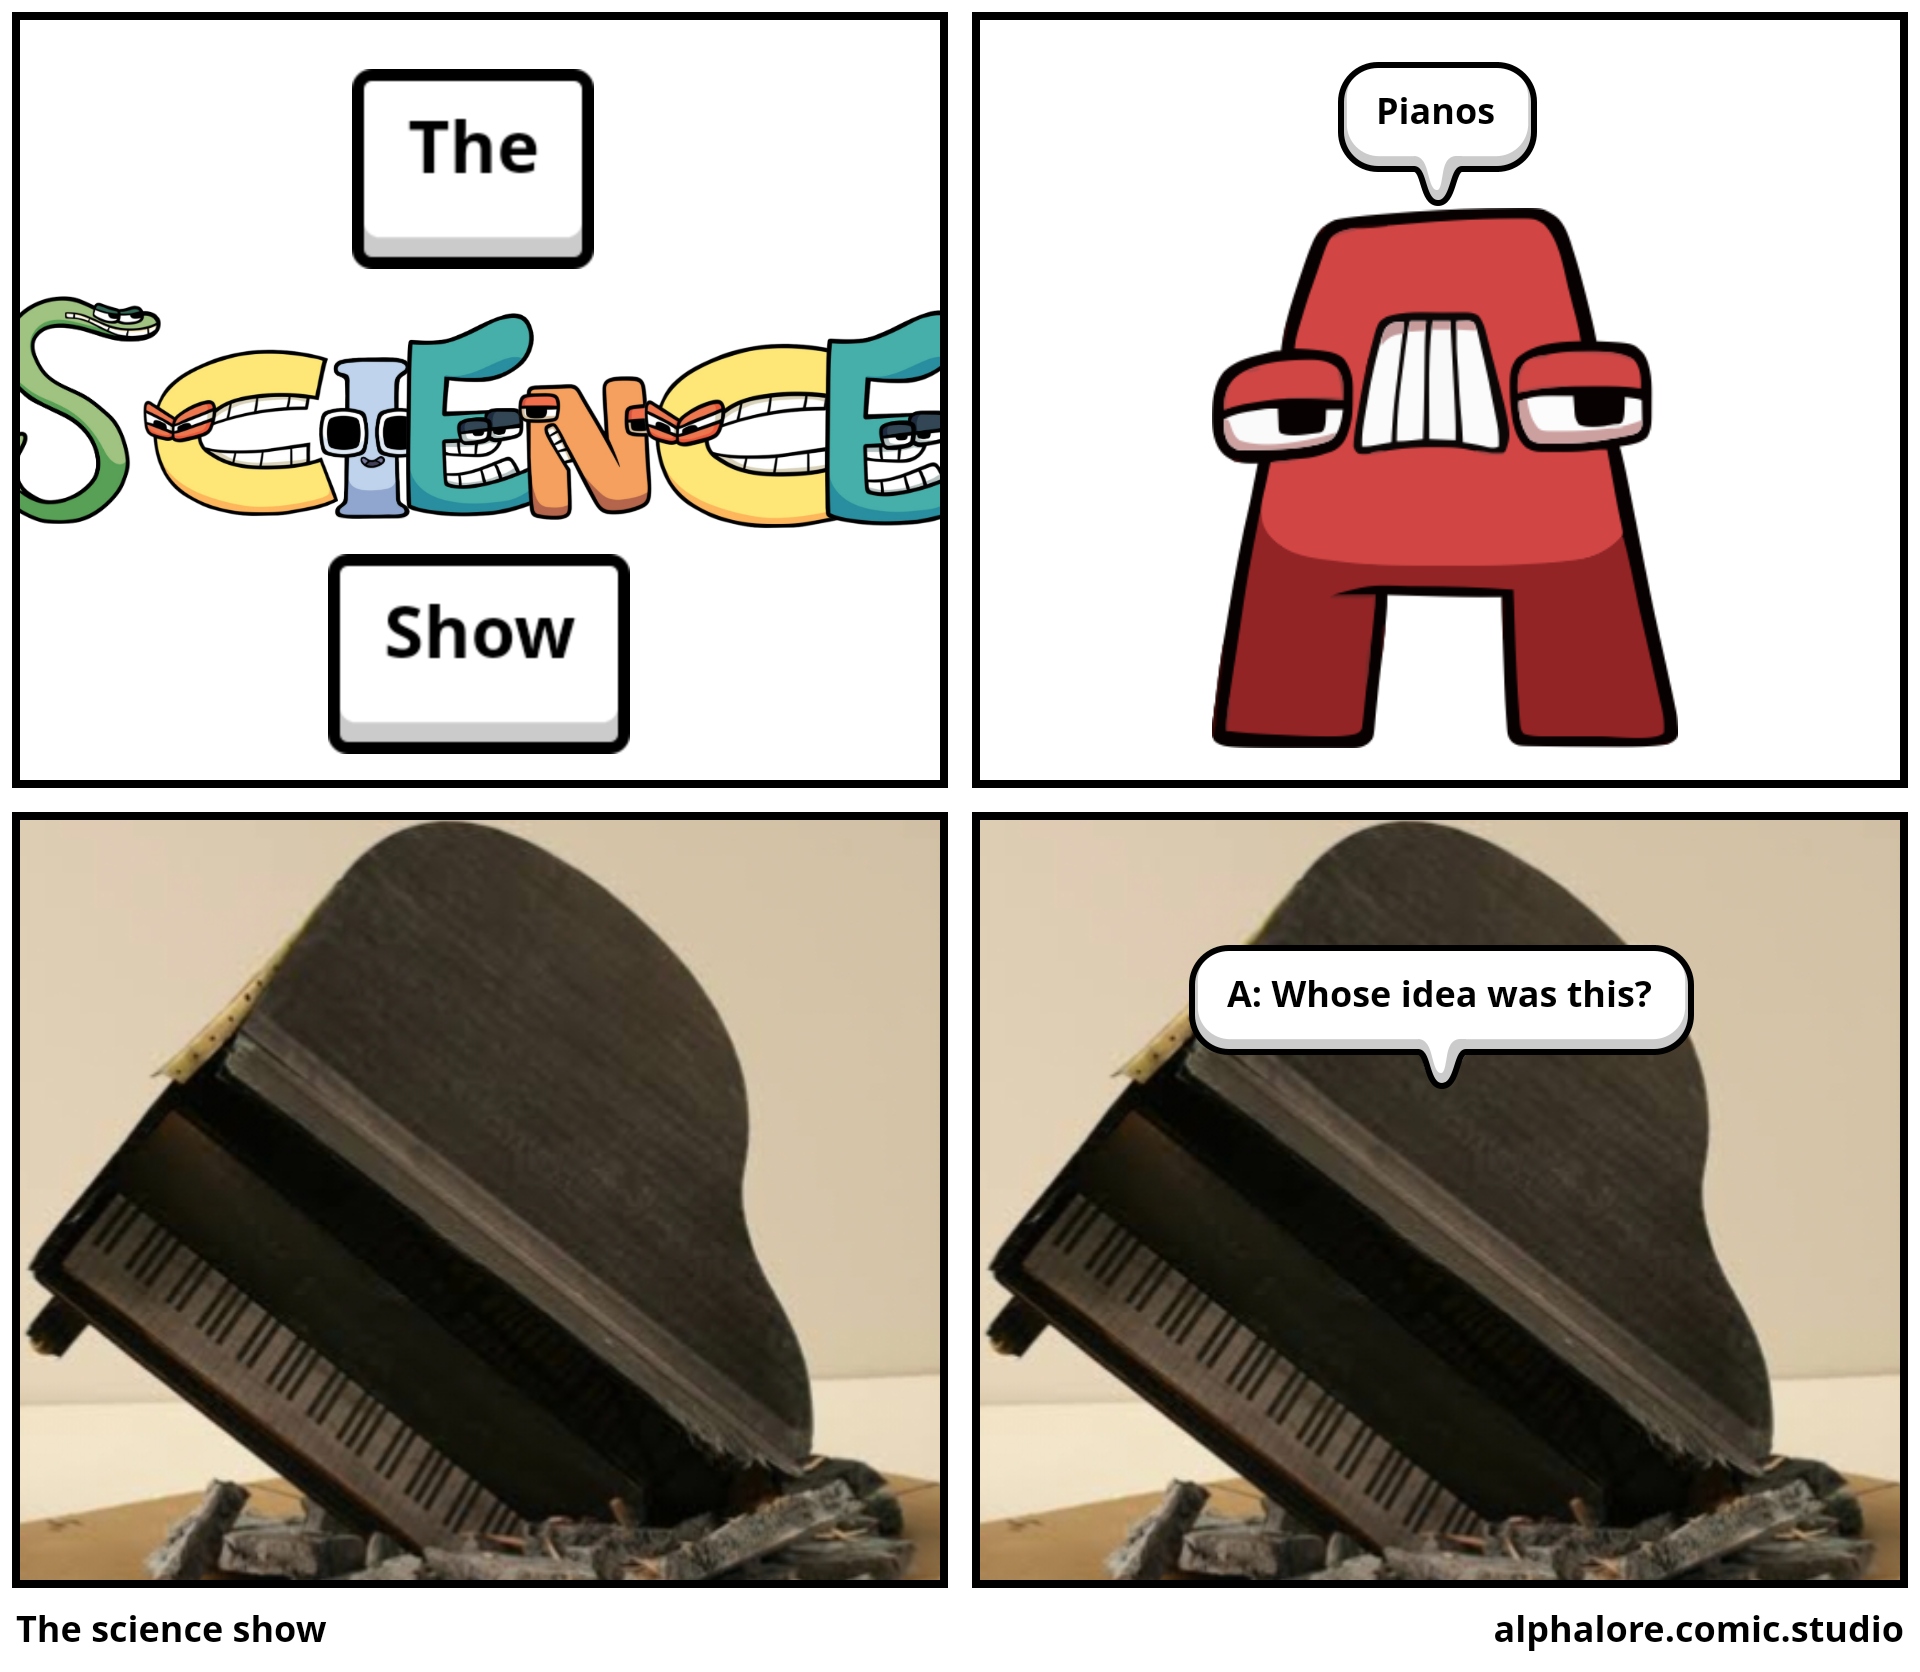 The science show